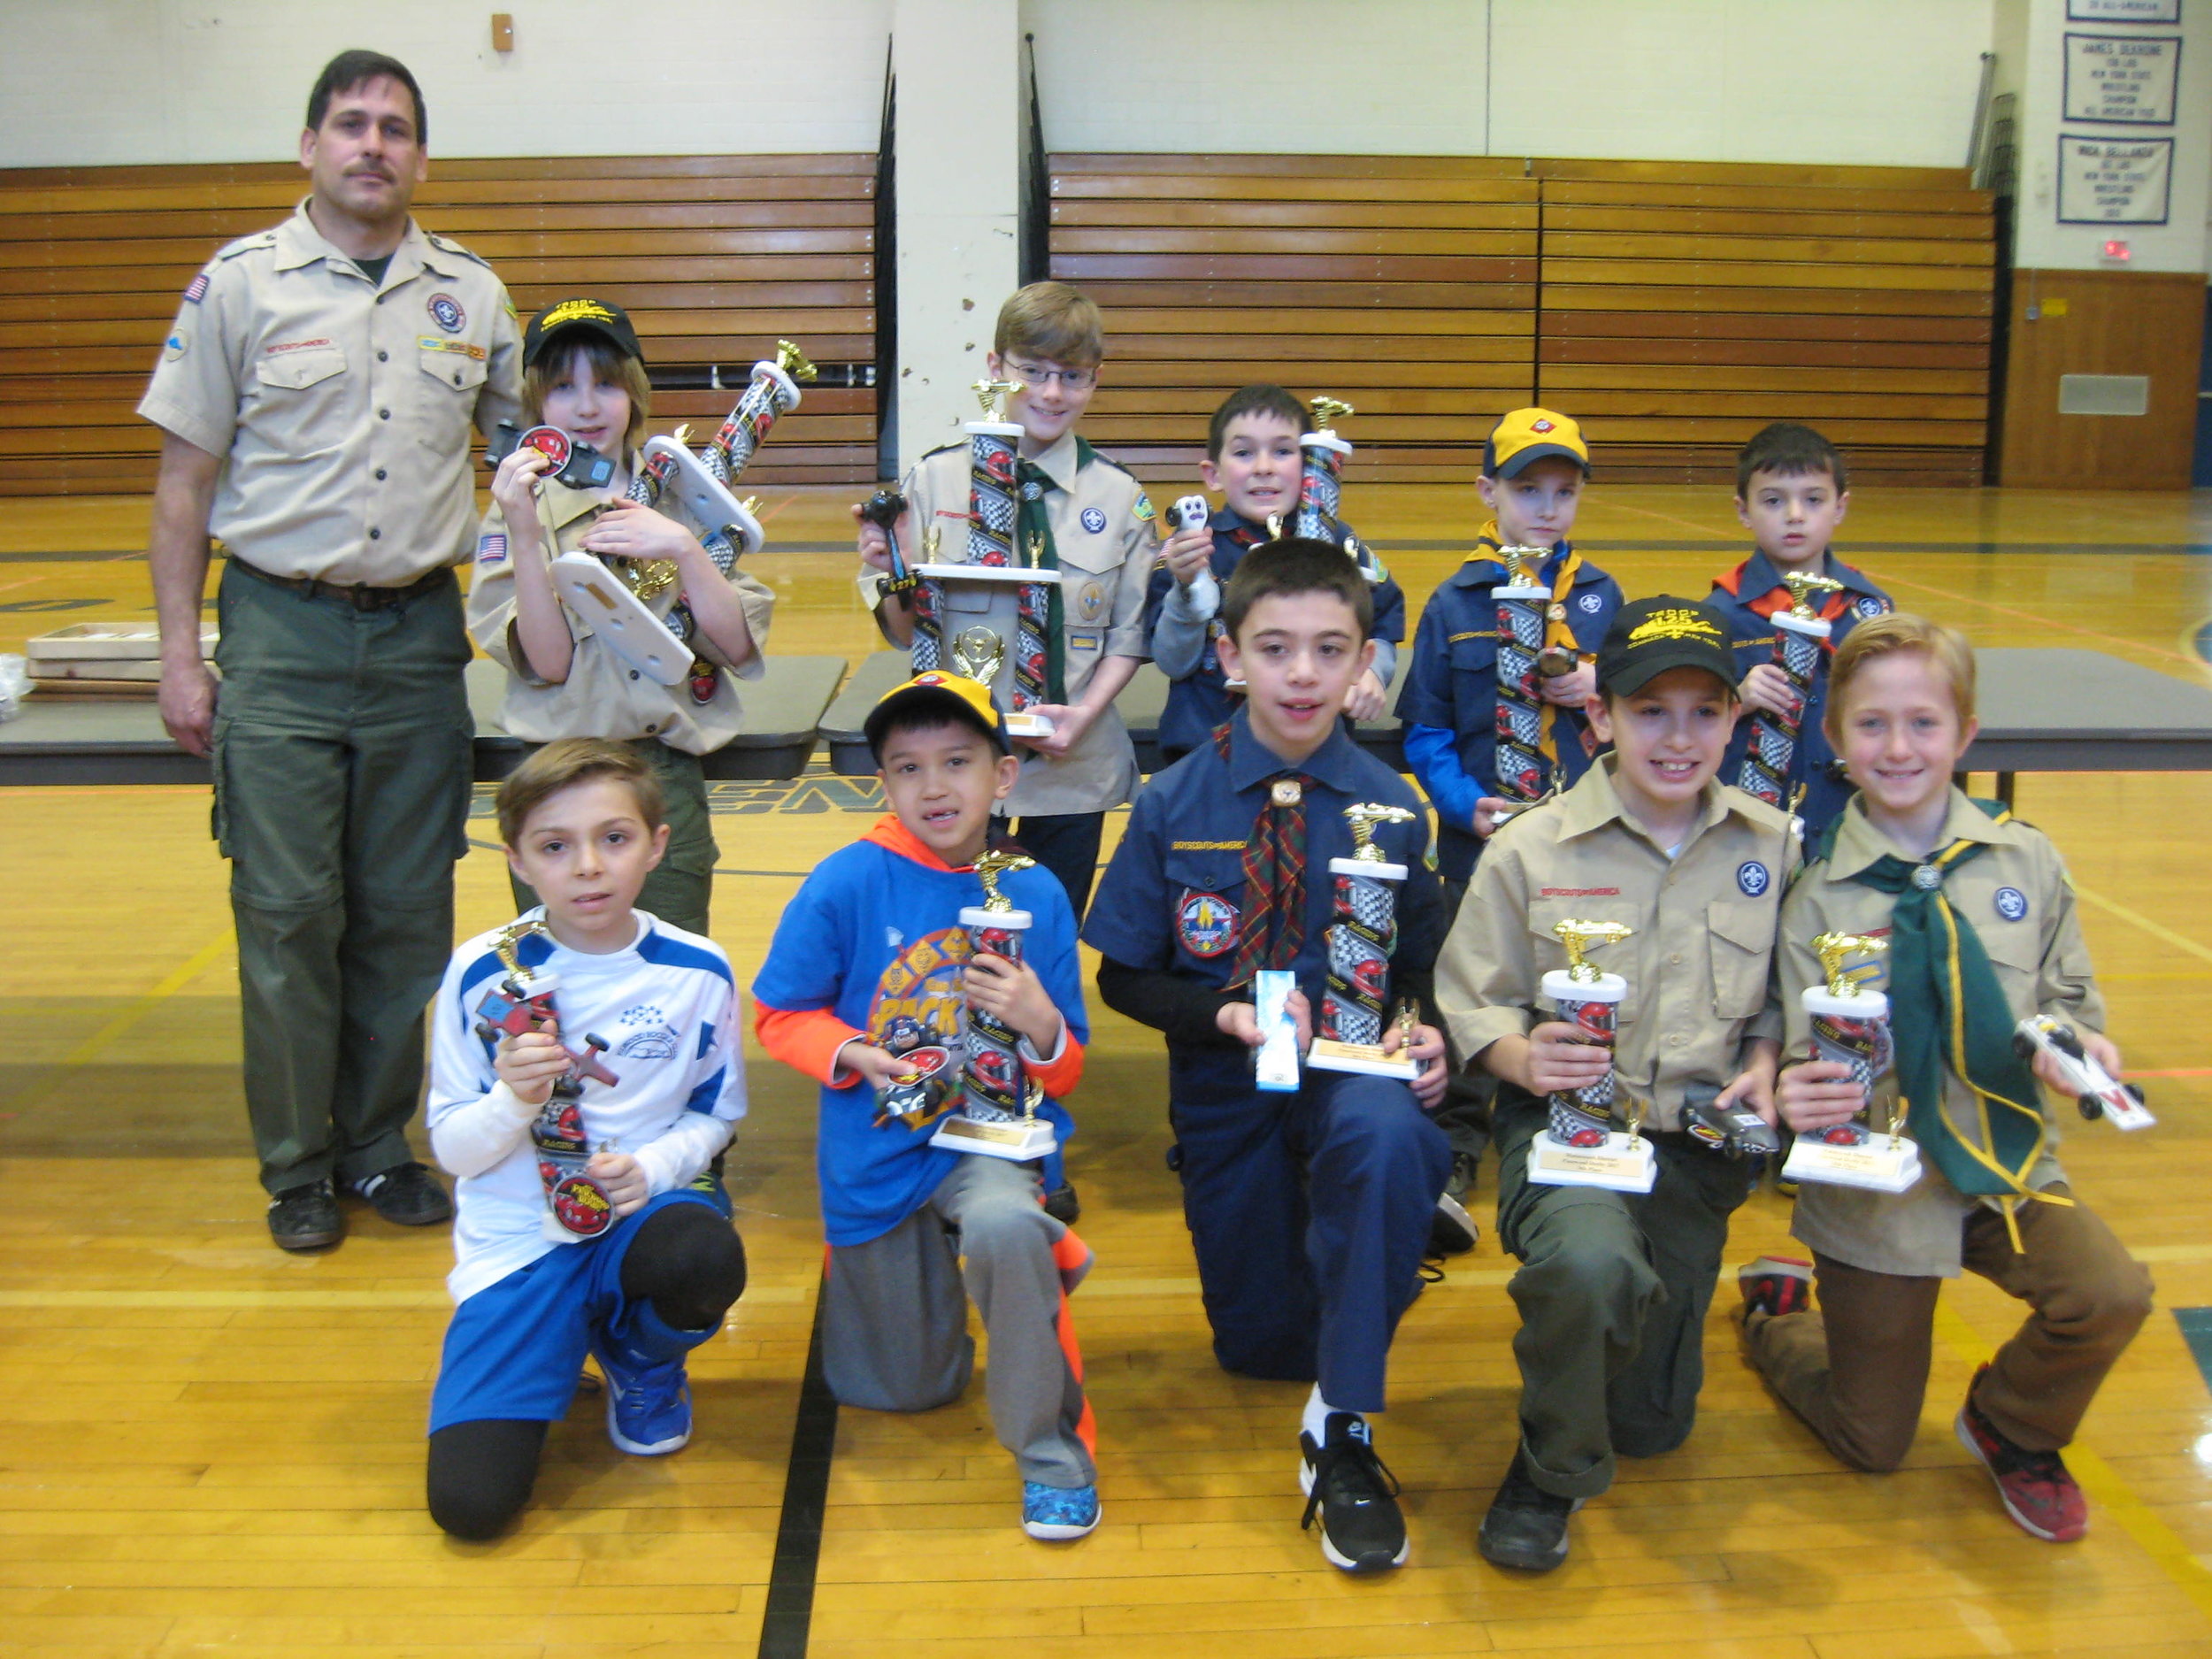  Top district winners, from right, were: (front row) Gregory M, 1st place, ofPack 329, Commack; Aidan L., 2nd place, ofPack 52, East Northport; Mario M., 3rd place, ofPack 5, Northport; Jack R., 4th place, ofPack225, Greenlawn; and, standing in for 5